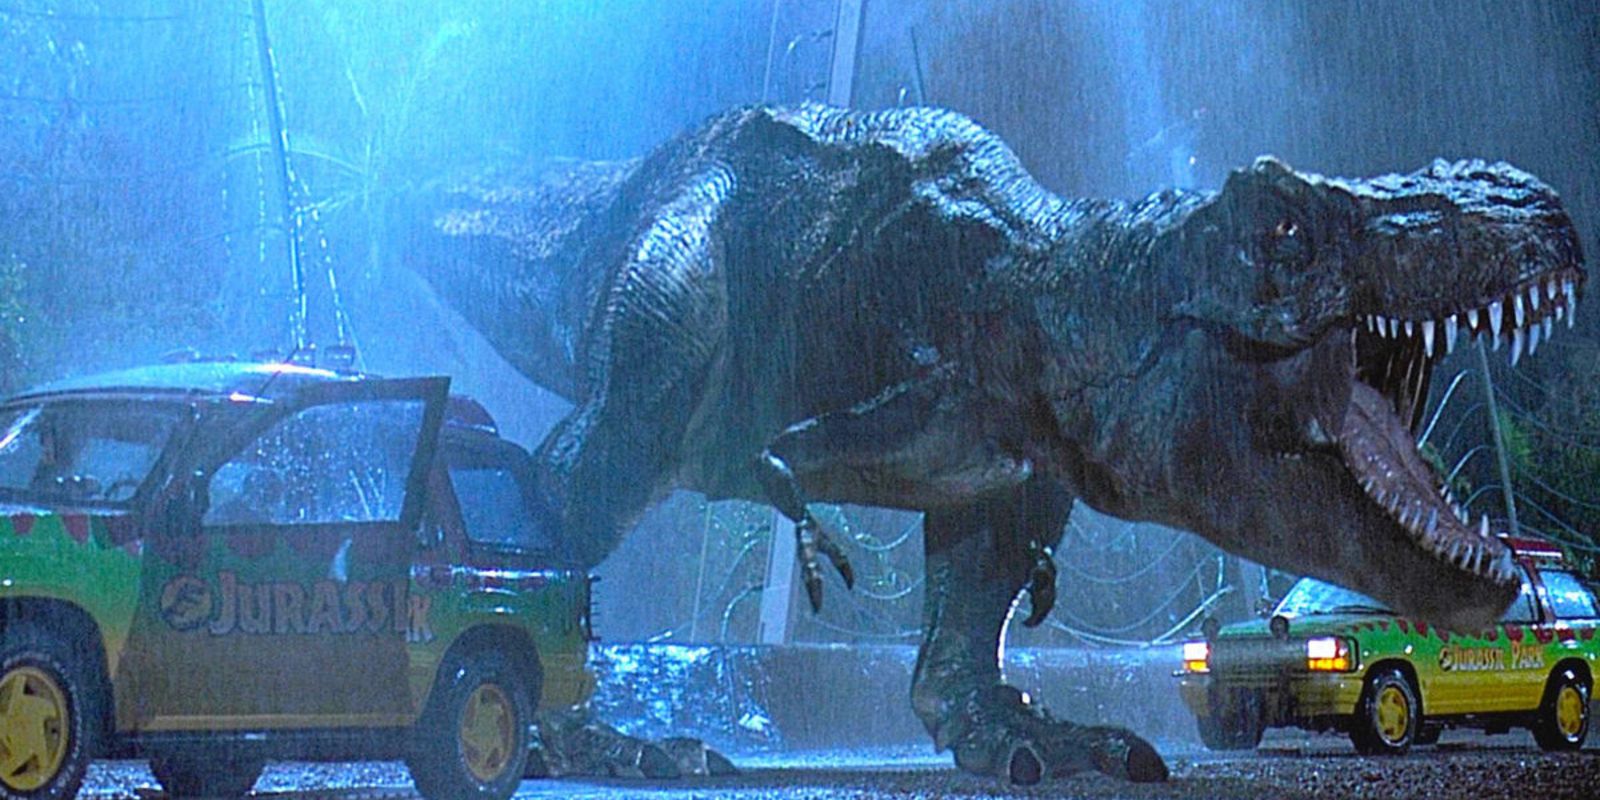 8 Major Jurassic Park Book Characters The Movies Completely Cut